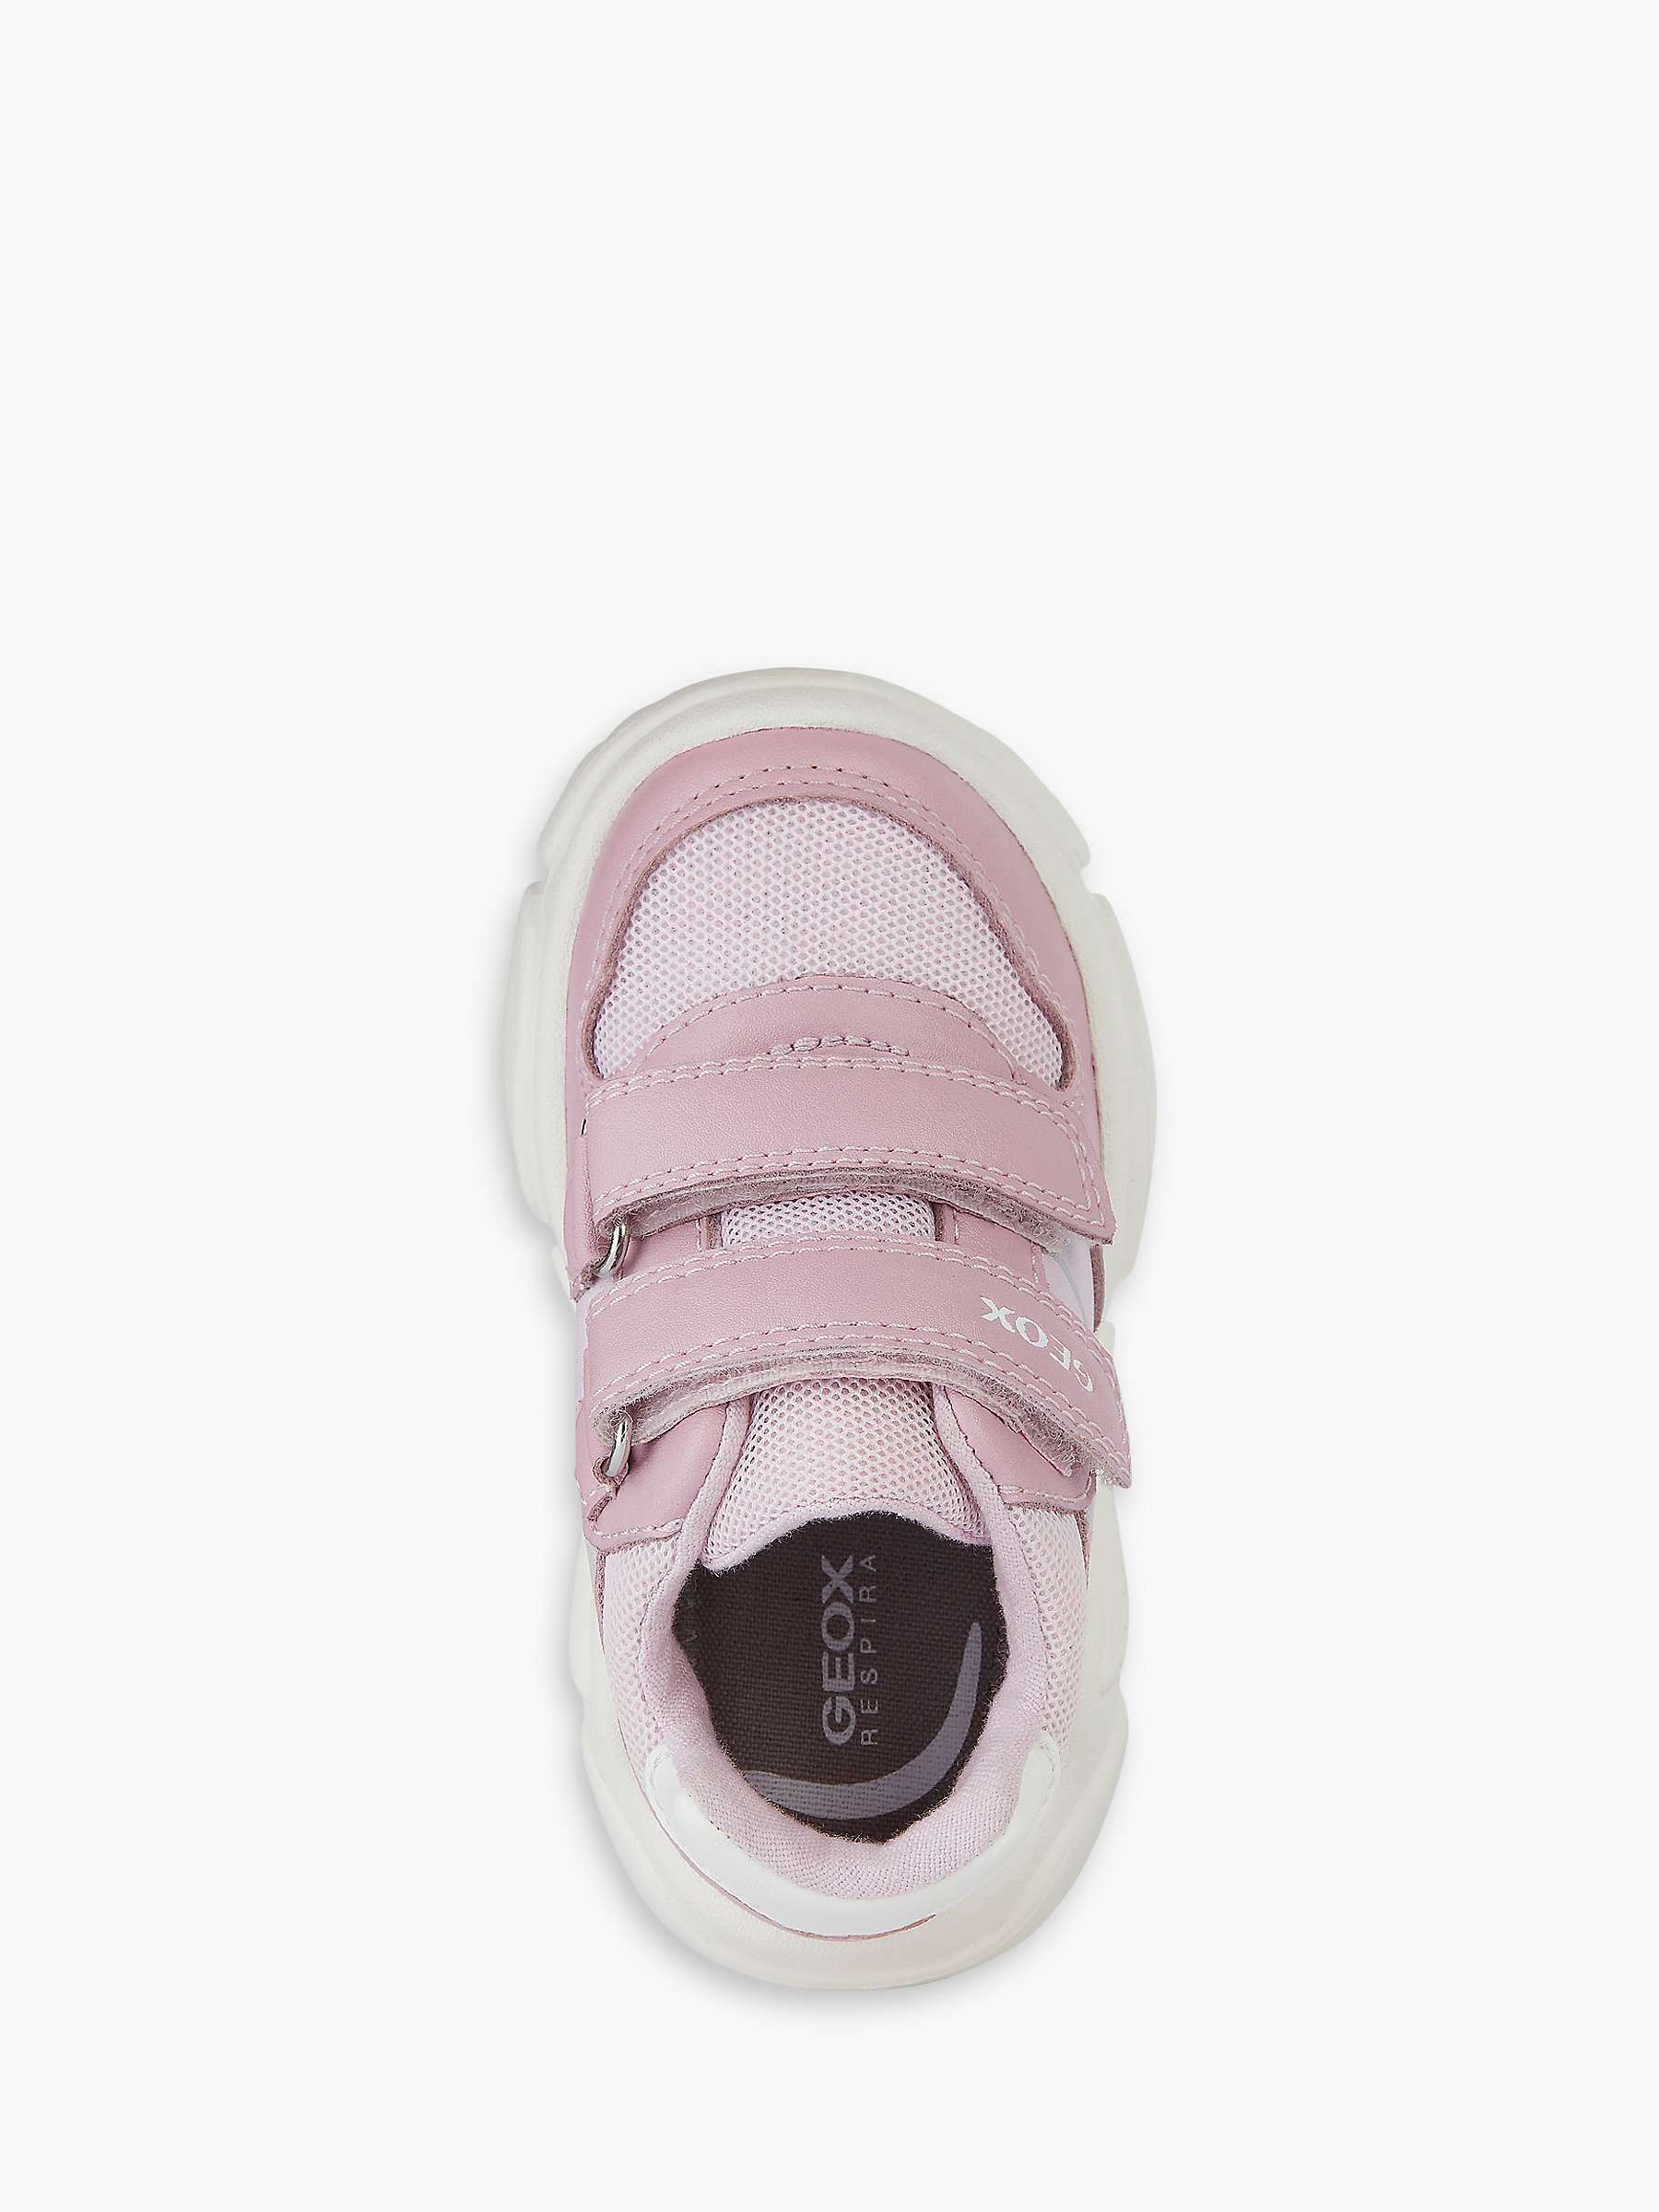 Buy Geox Kids' Ciufciuf Low Cut Trainers Online at johnlewis.com